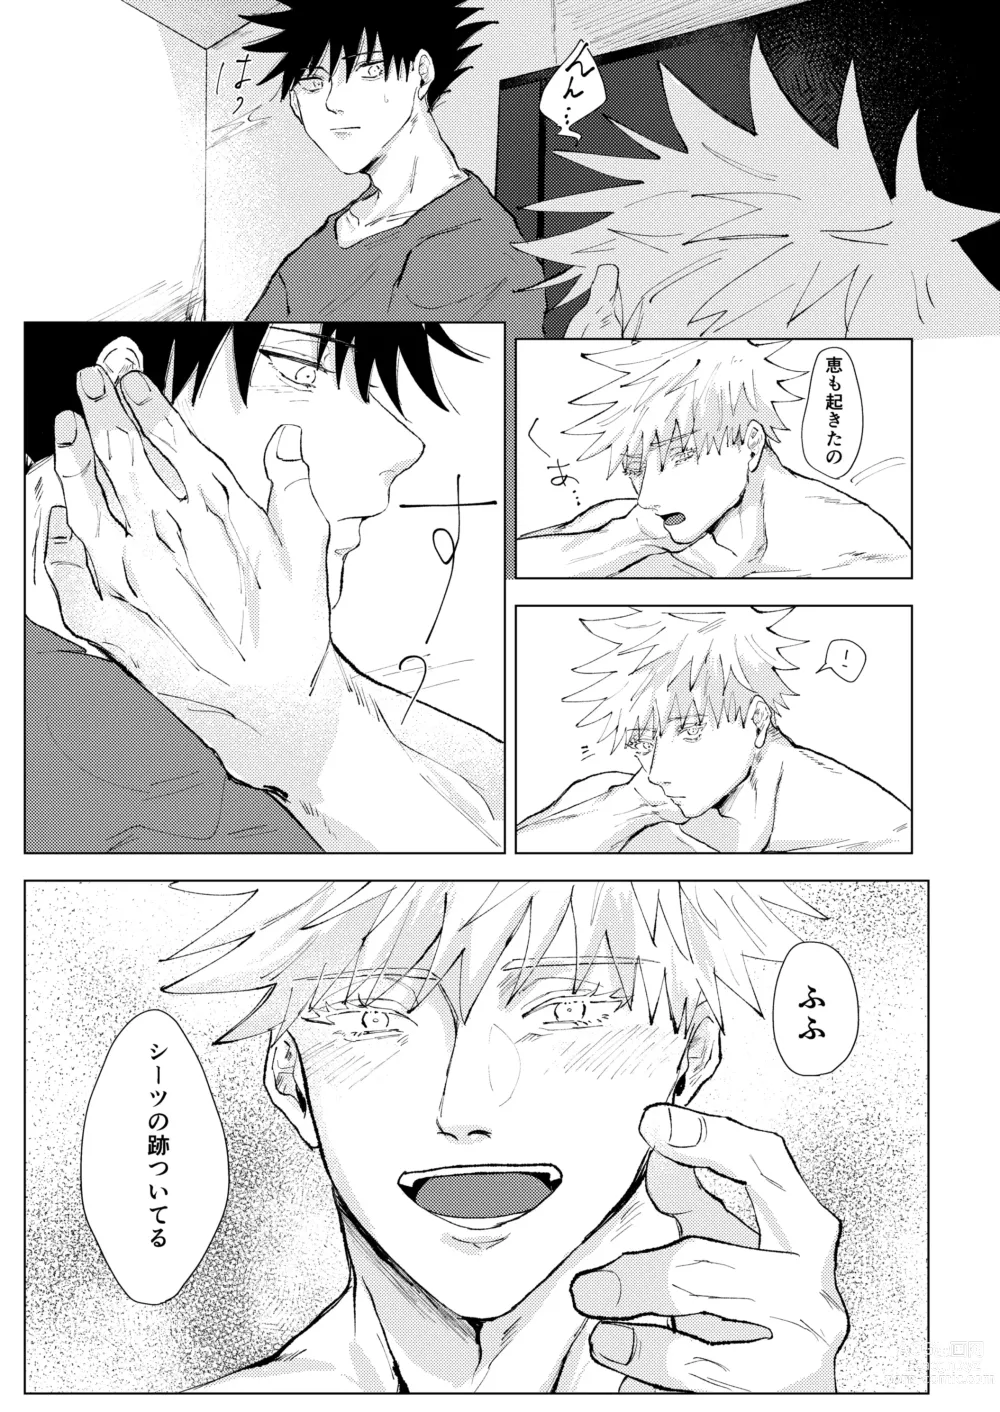 Page 8 of doujinshi Lack of...